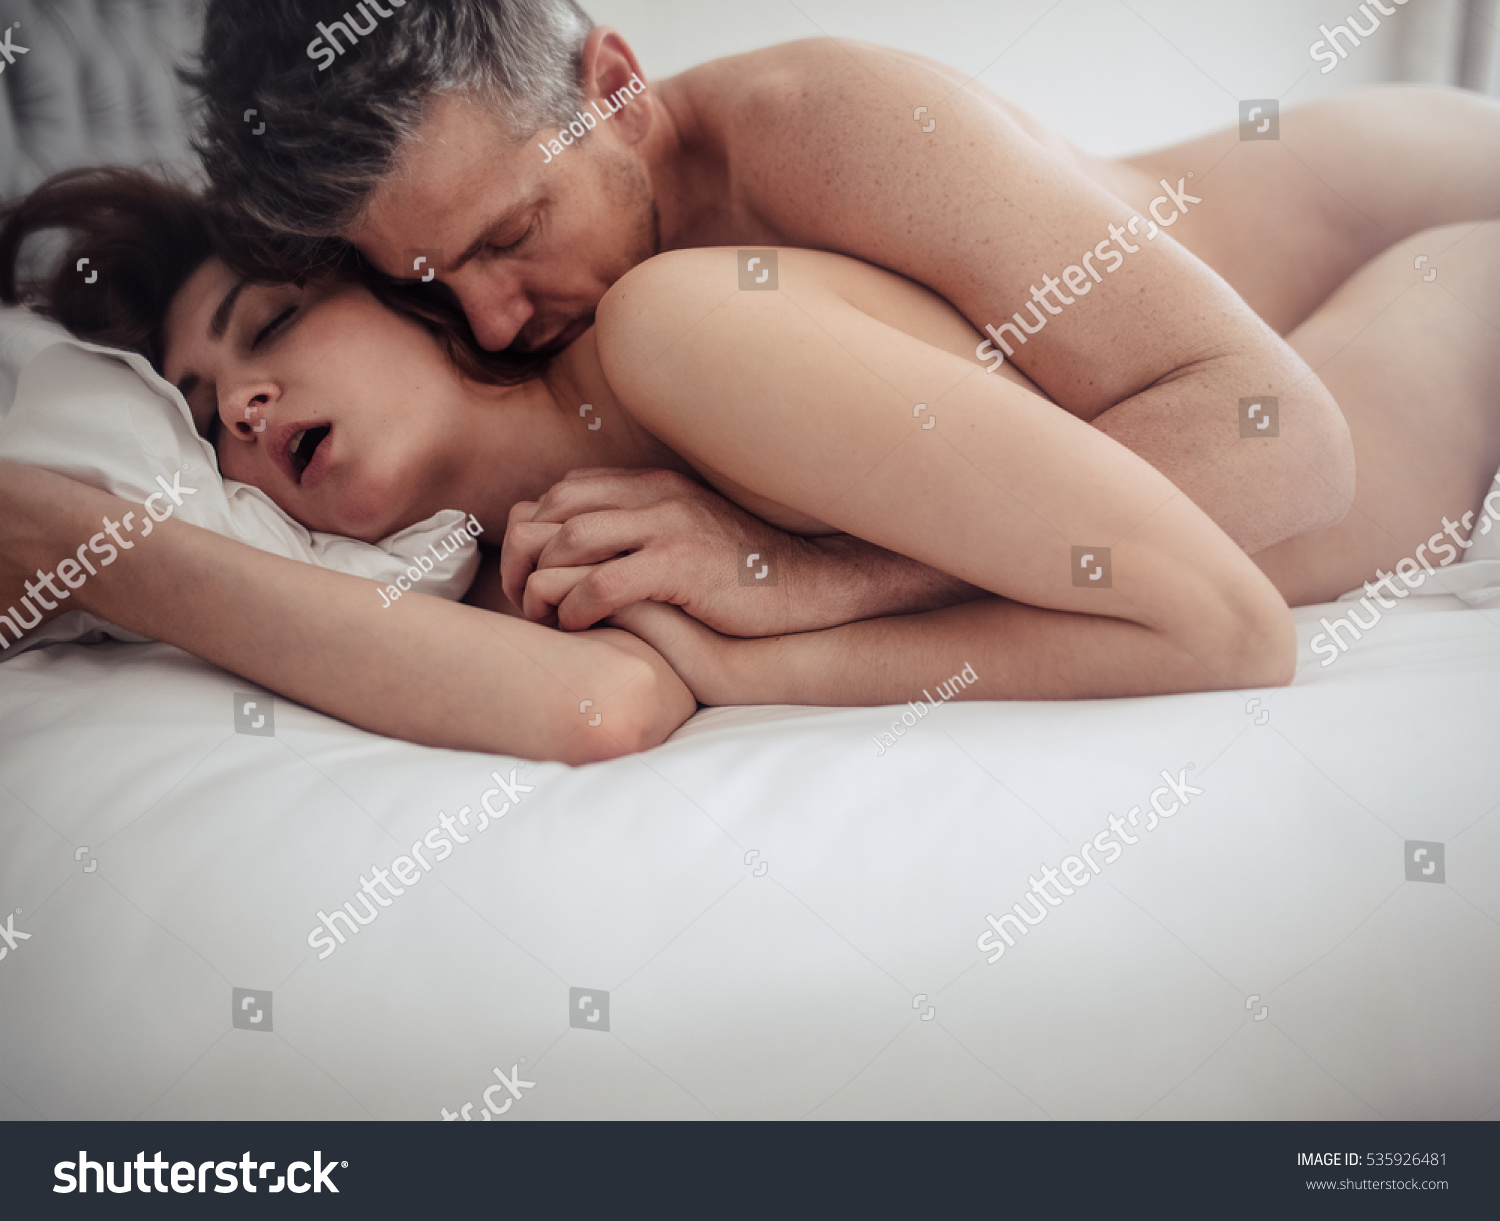 Passionate Couple Bed Having Sex Young Stock Photo -3063